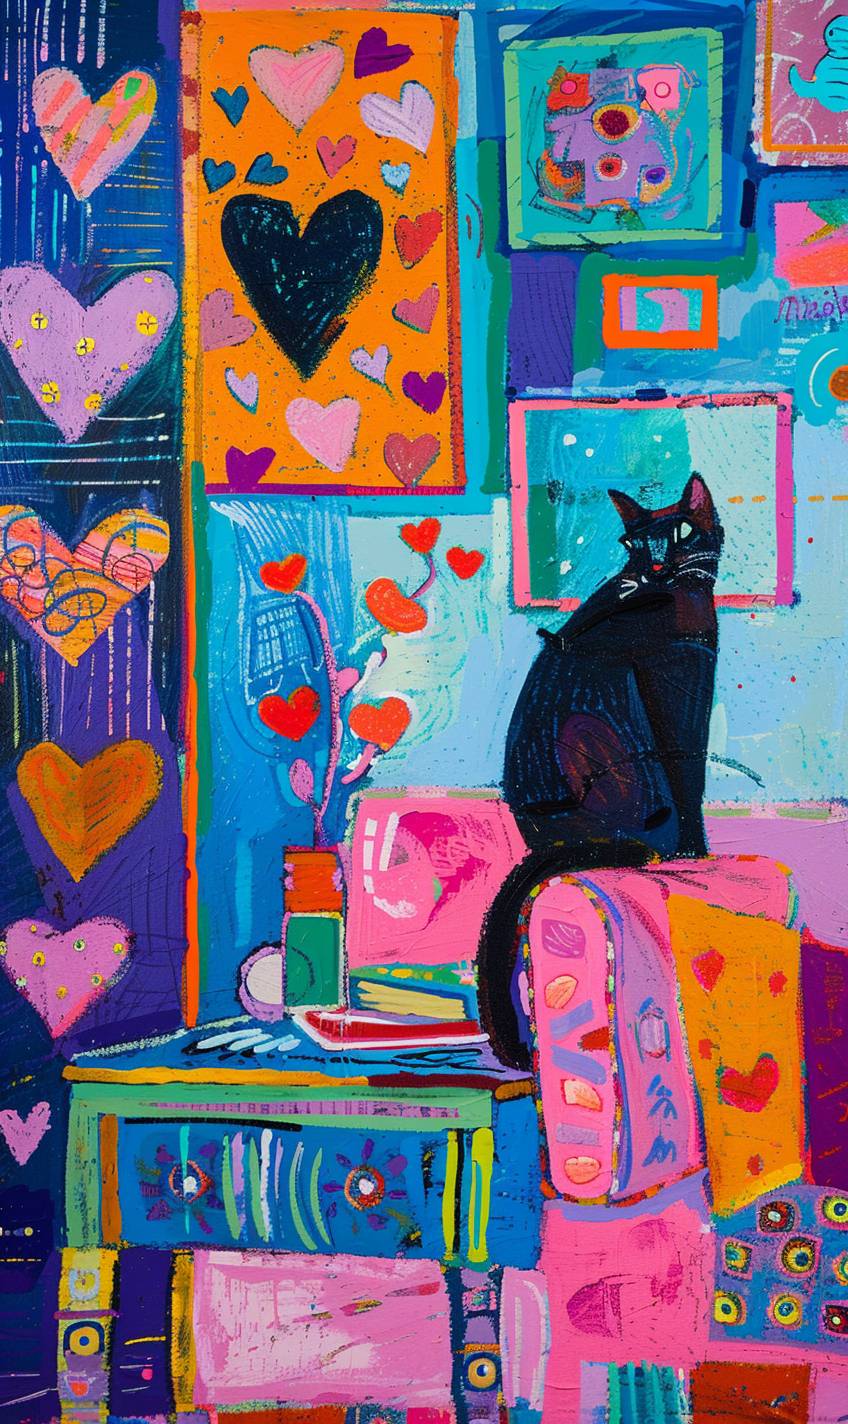 Risograph artwork featuring a holographic scene with a cat, created using oil pastels in the art style of Itzchak Tarkay. The design includes many heart patterns and showcases rich front and back views. Color blocks are expressed in a simplistic way, reminiscent of surrealism. The colors are mainly bright and colorful, resembling the roughness of oil painting and sketchy fauvism, in the style of Maira Kalman and Matisse. The parameter information has been filtered.